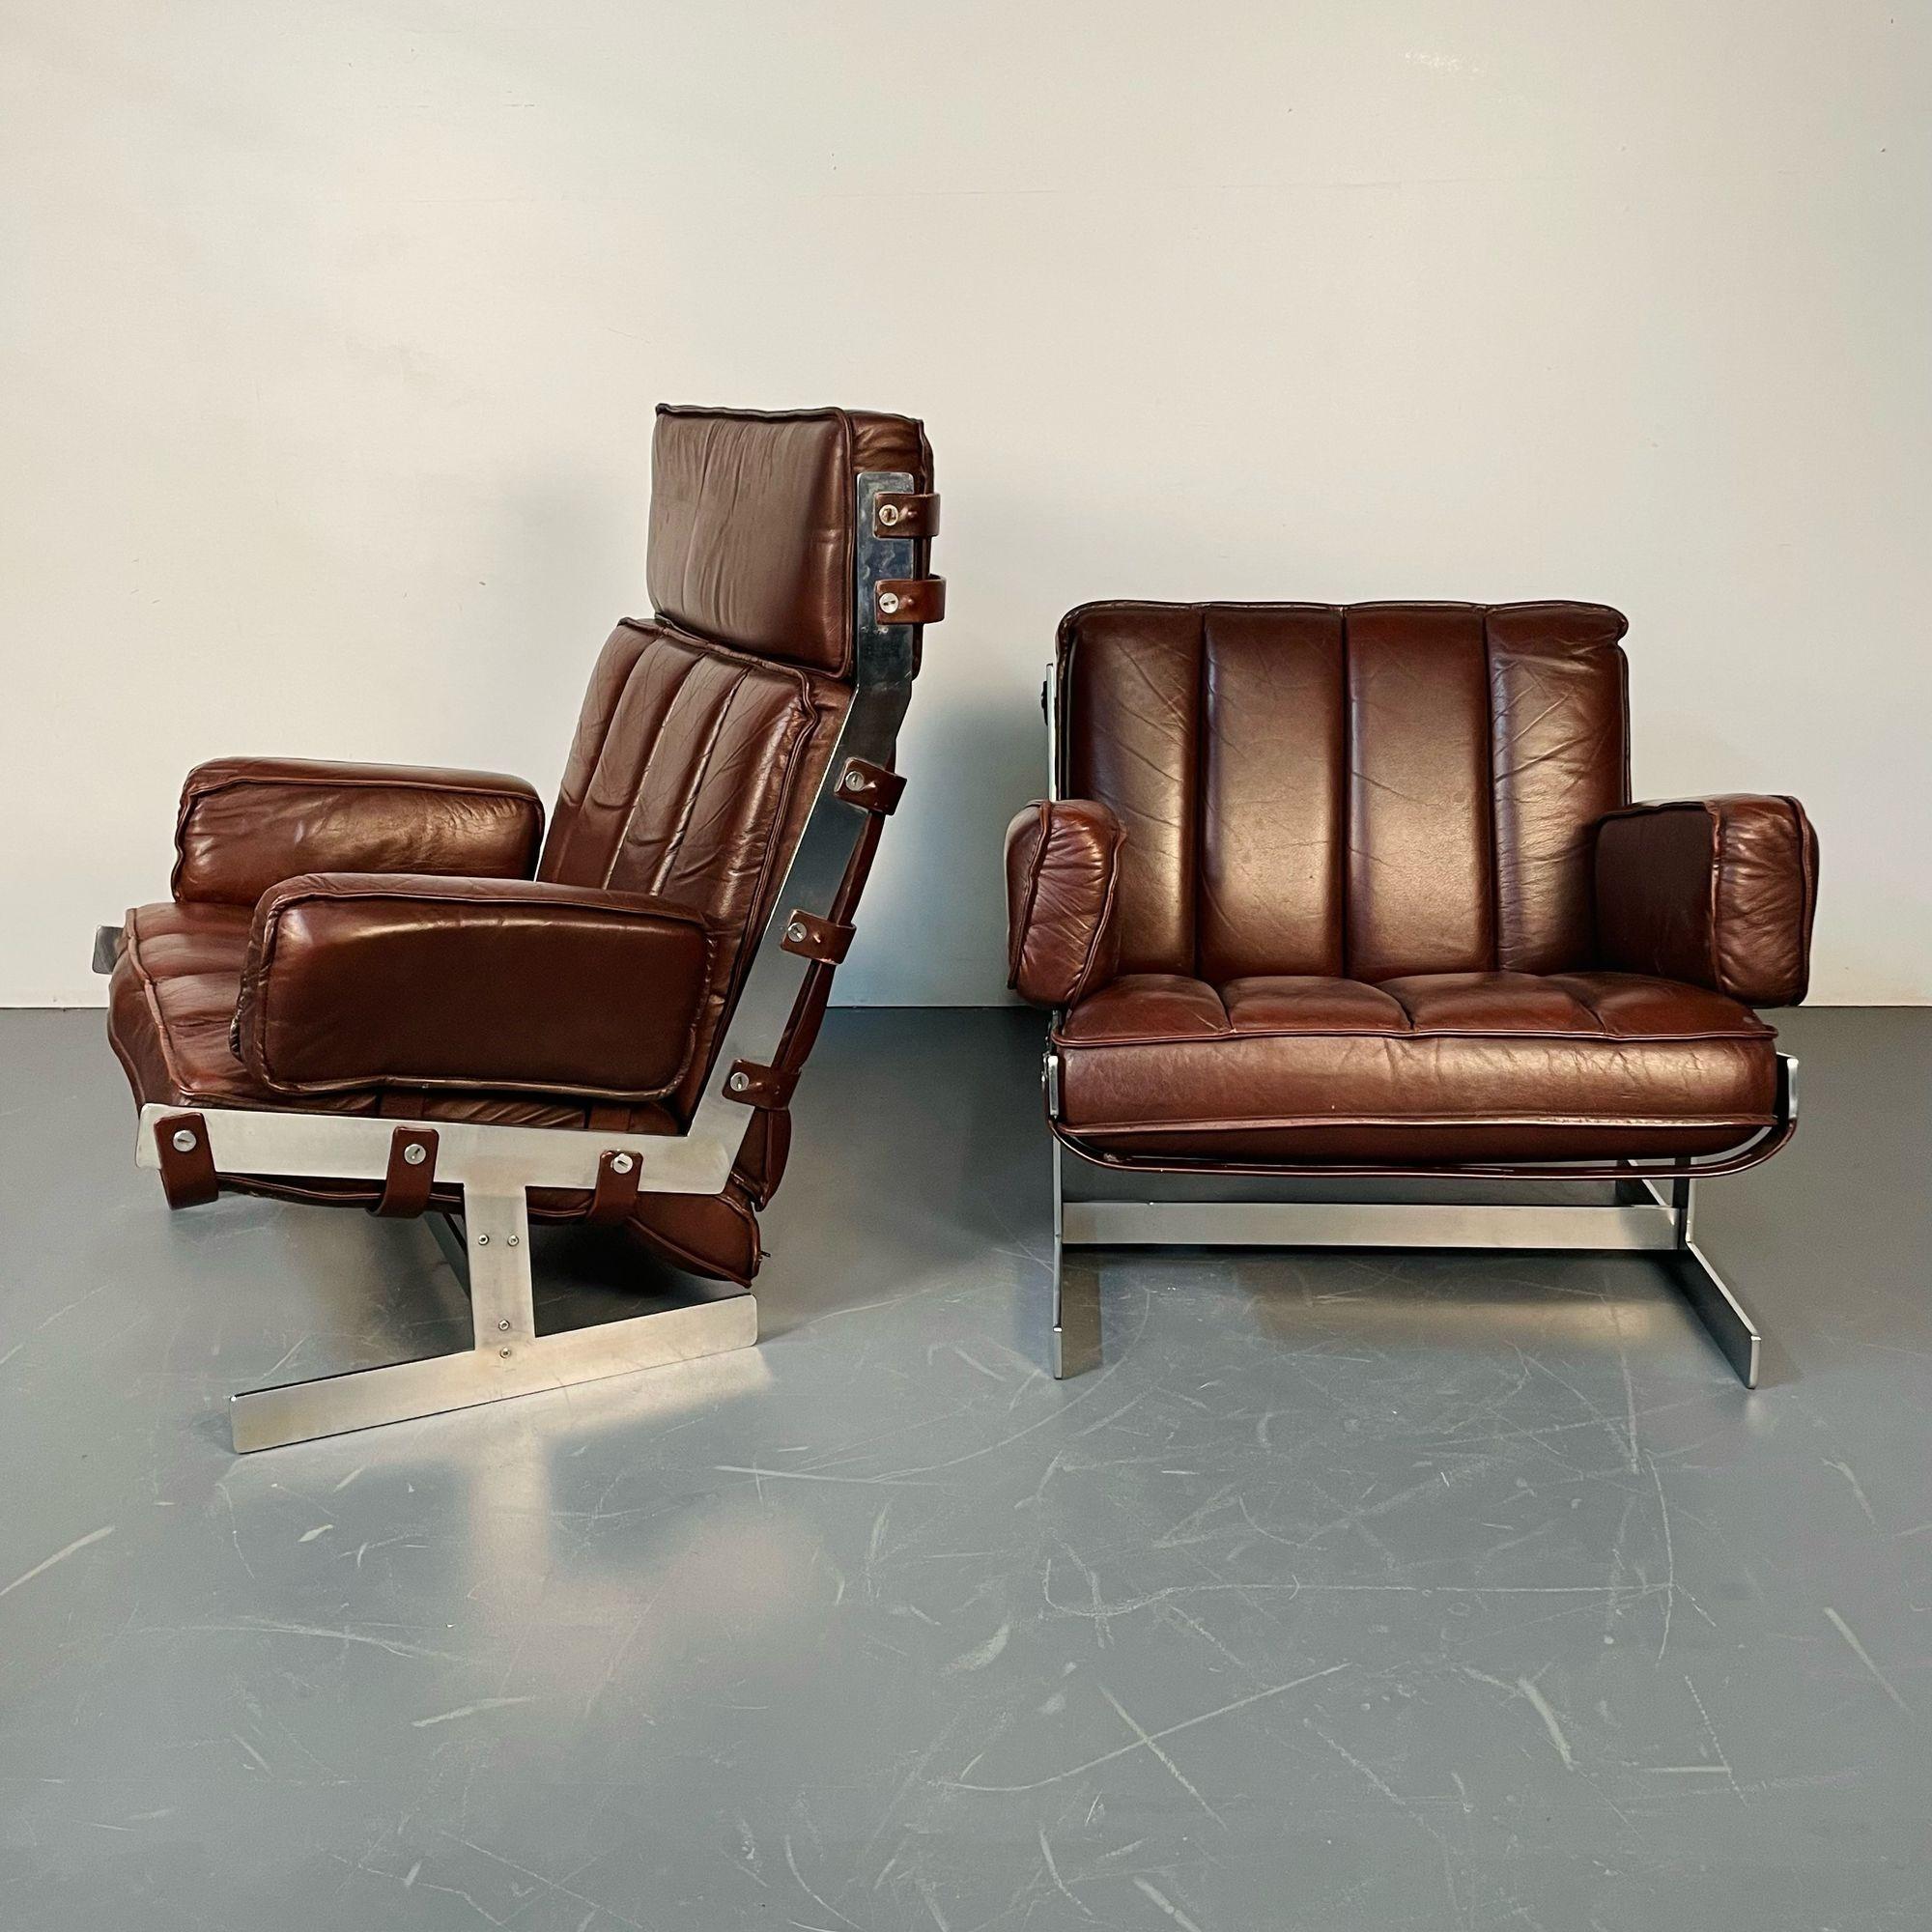 Arne Norell, Swedish Mid-Century Modern Lounge Chairs, Leather, Steel, 1960s For Sale 2